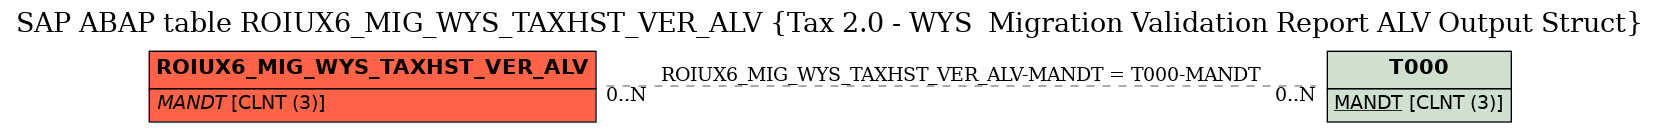 E-R Diagram for table ROIUX6_MIG_WYS_TAXHST_VER_ALV (Tax 2.0 - WYS  Migration Validation Report ALV Output Struct)